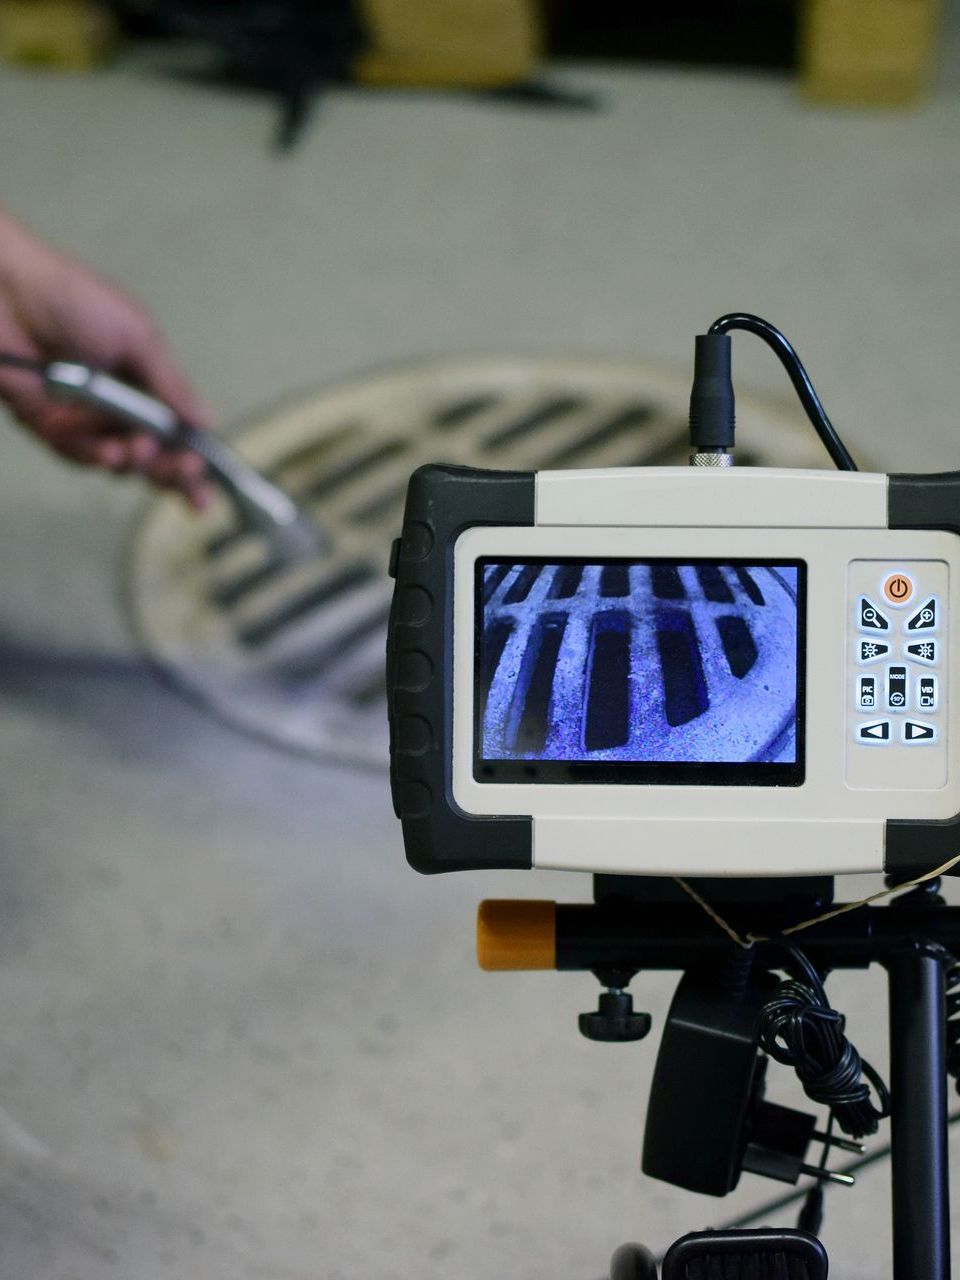 a manhole cover is being inspected by a camera